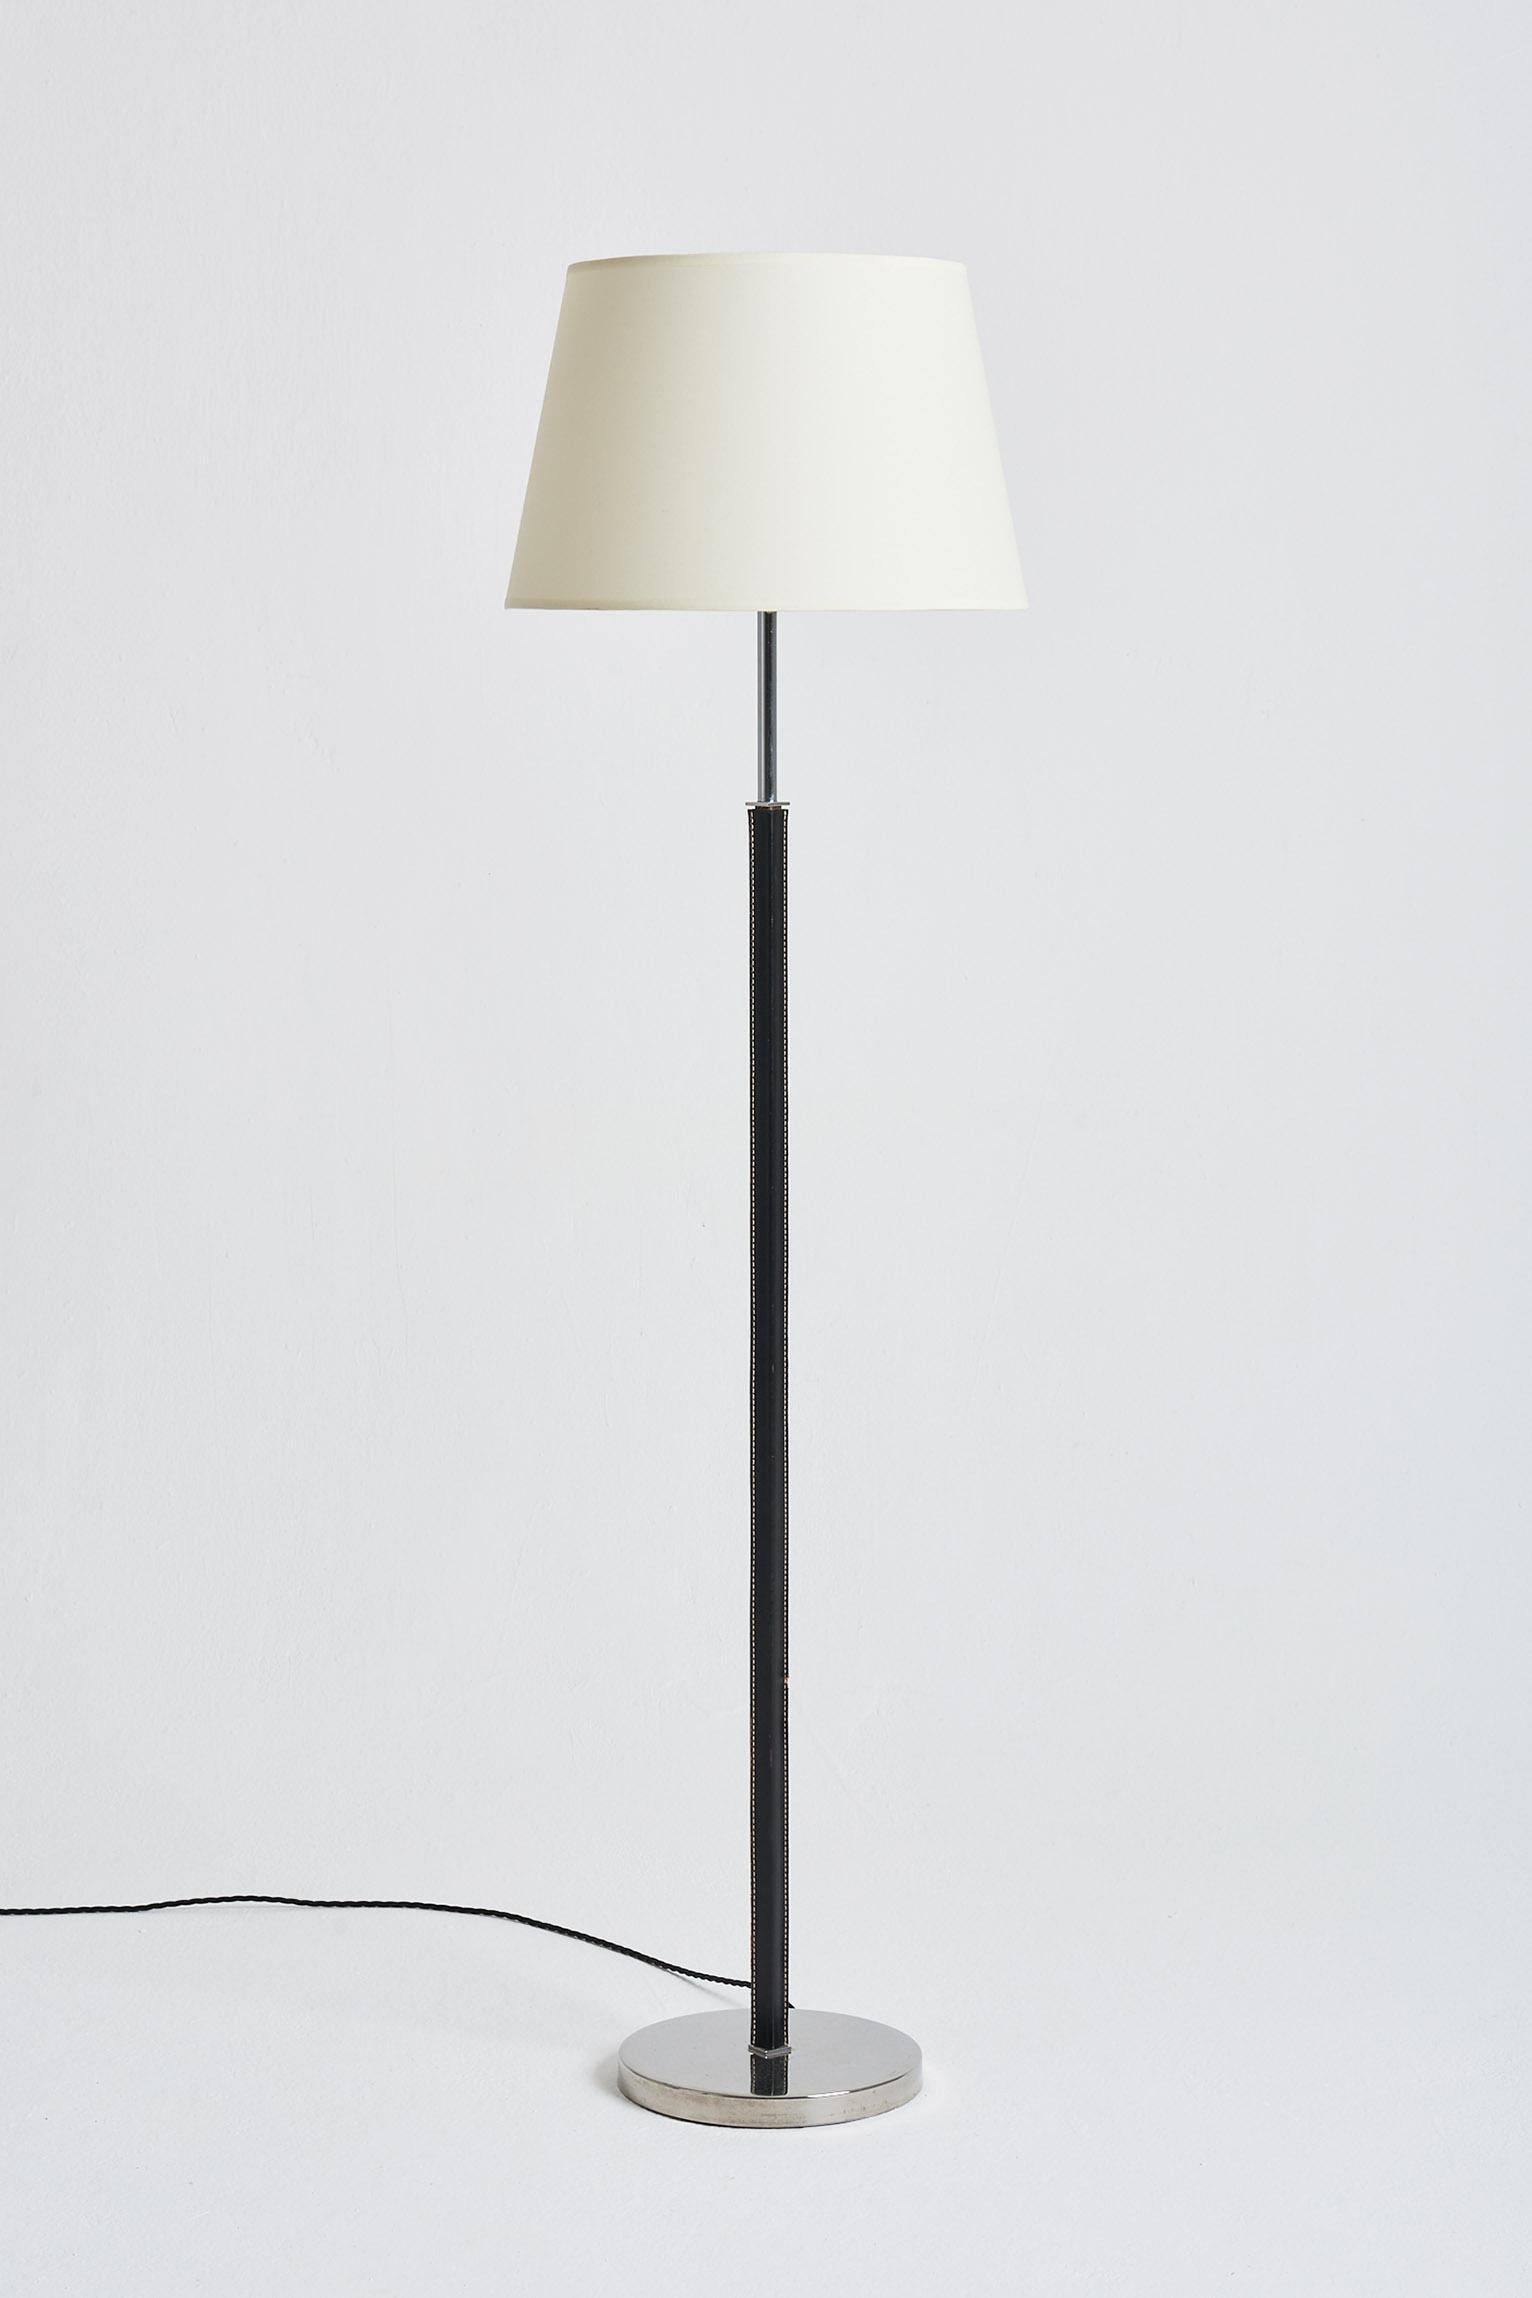 A nickel and saddle stitched black leather floor lamp, by Falkenbergs Belysning. 
Sweden, third quarter of the 20th Century.
With the shade: 147 cm high by 41 cm diameter.
Lamp base only: 127 cm high by 25 cm diameter.